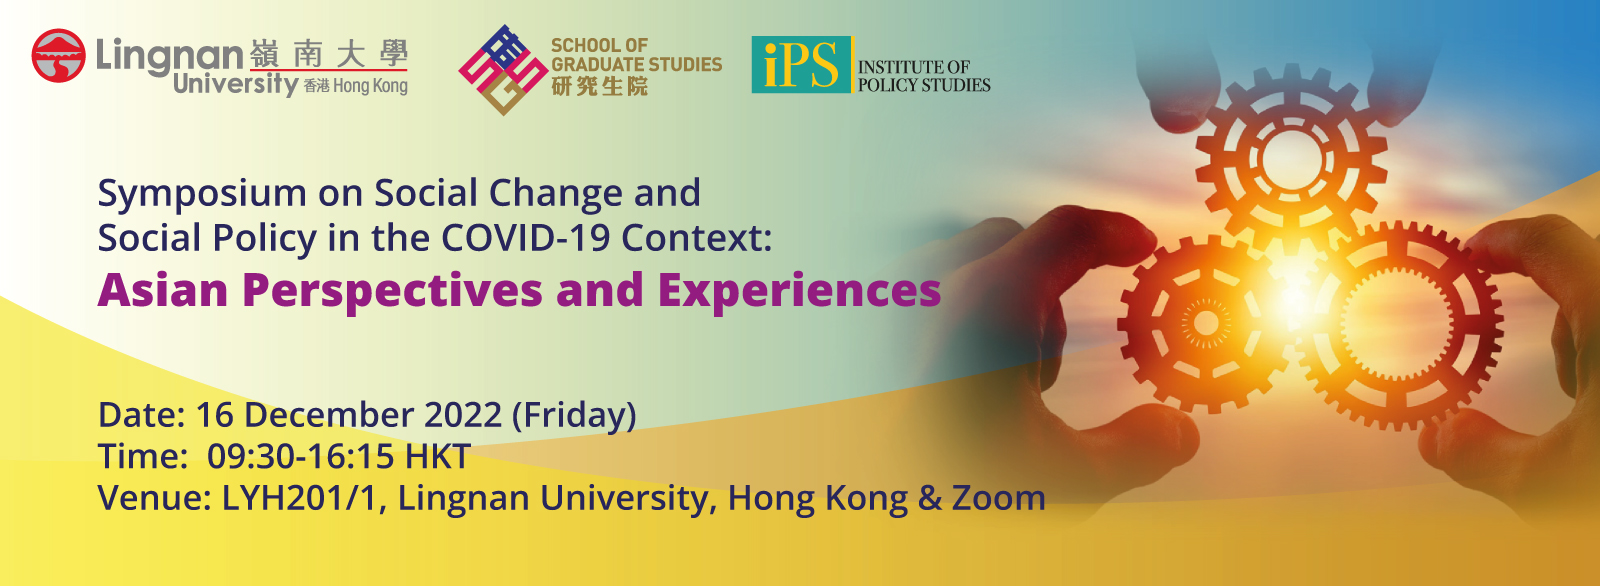 Symposium on Social Change and Social Policy in the COVID-19 Context: Asian Perspectives and Experiences